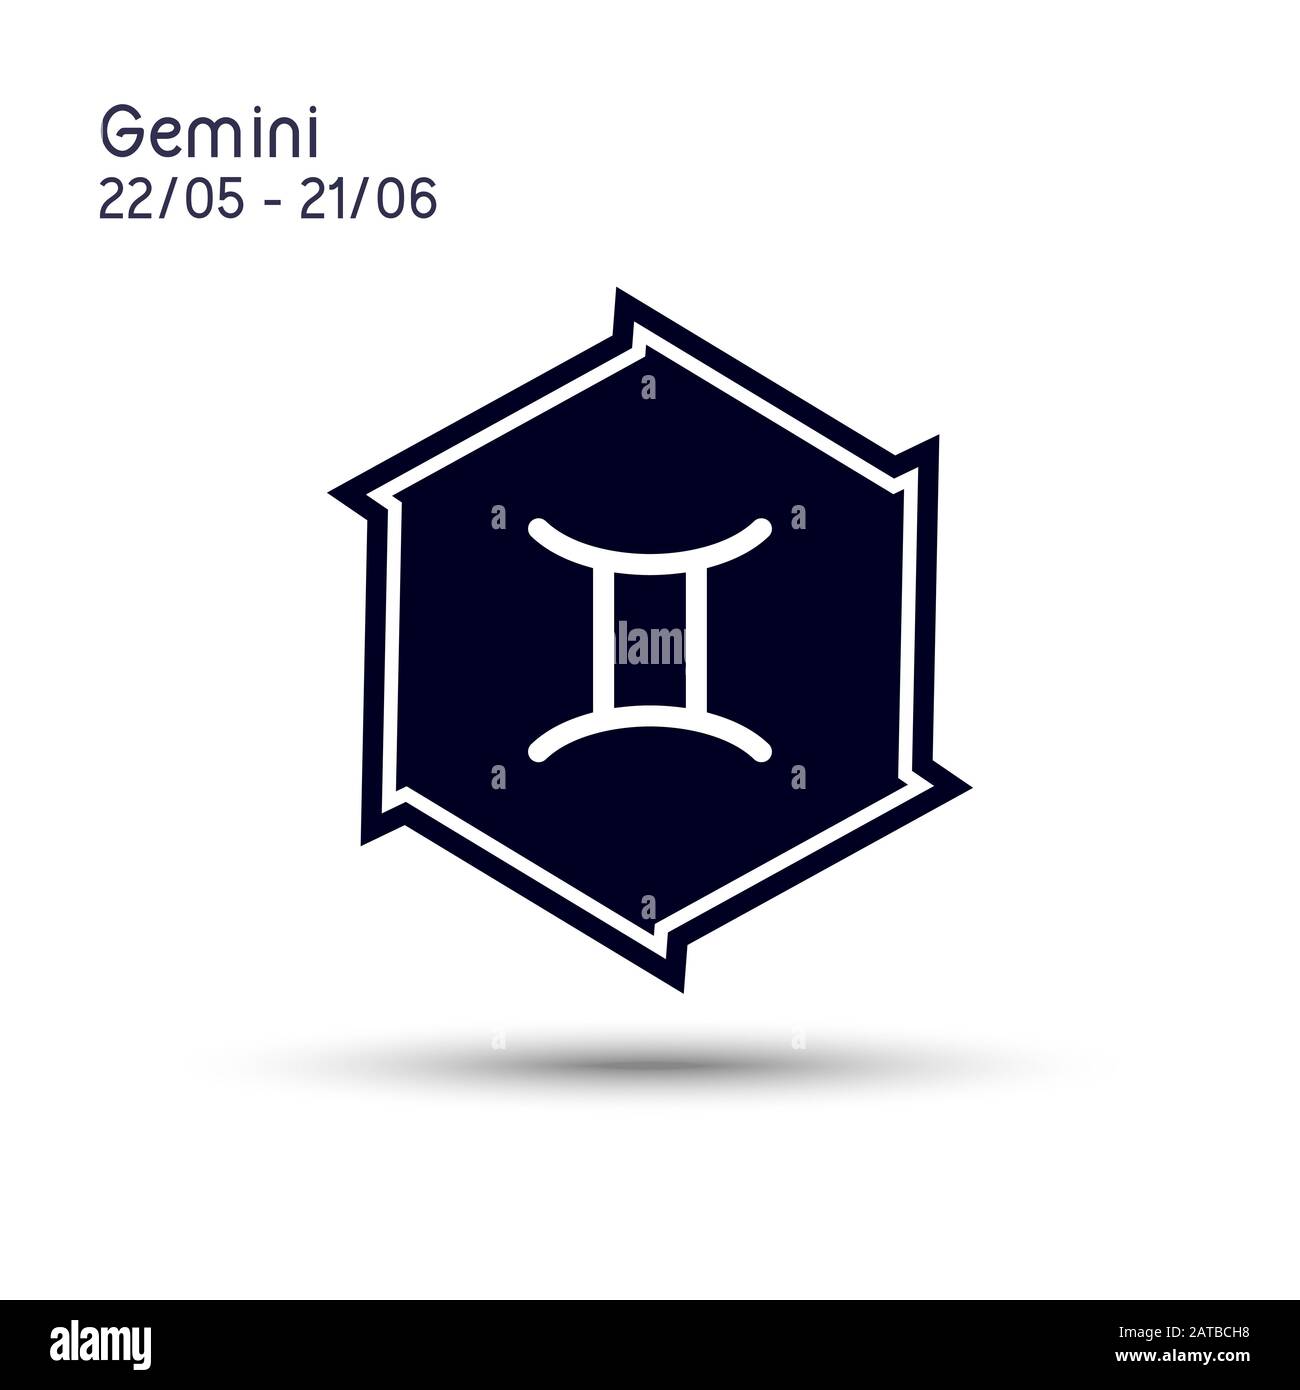 Gemini symbol Cut Out Stock Images & Pictures - Alamy